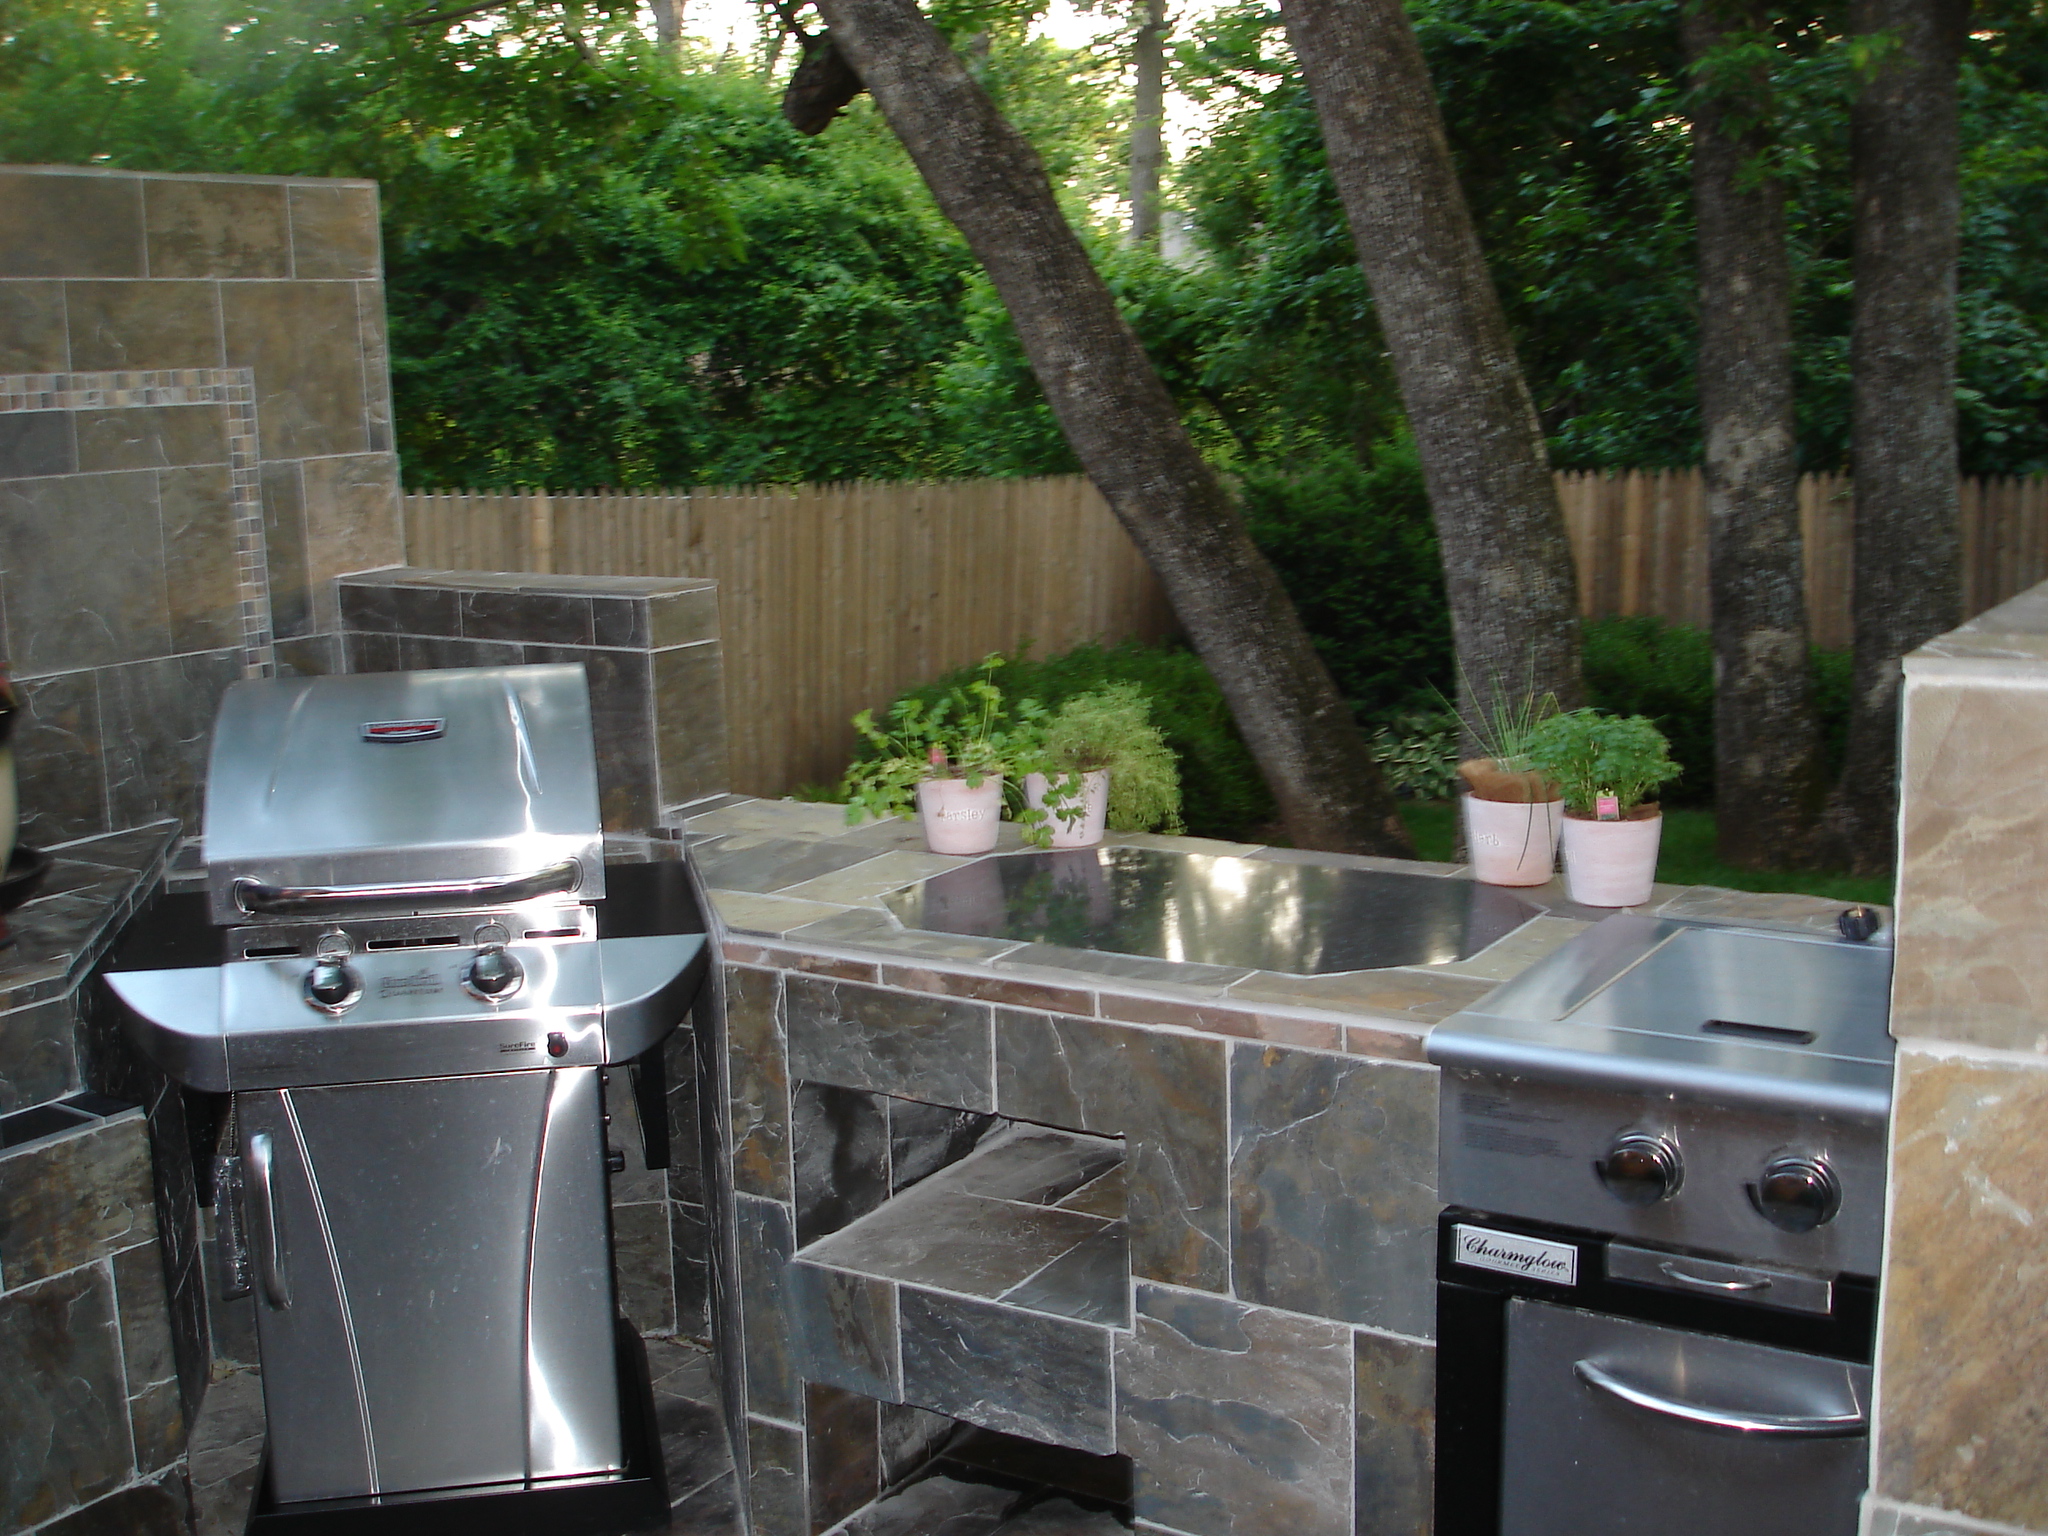 Reasons to make Outdoor kitchen on deck | Home Decorating Ideas